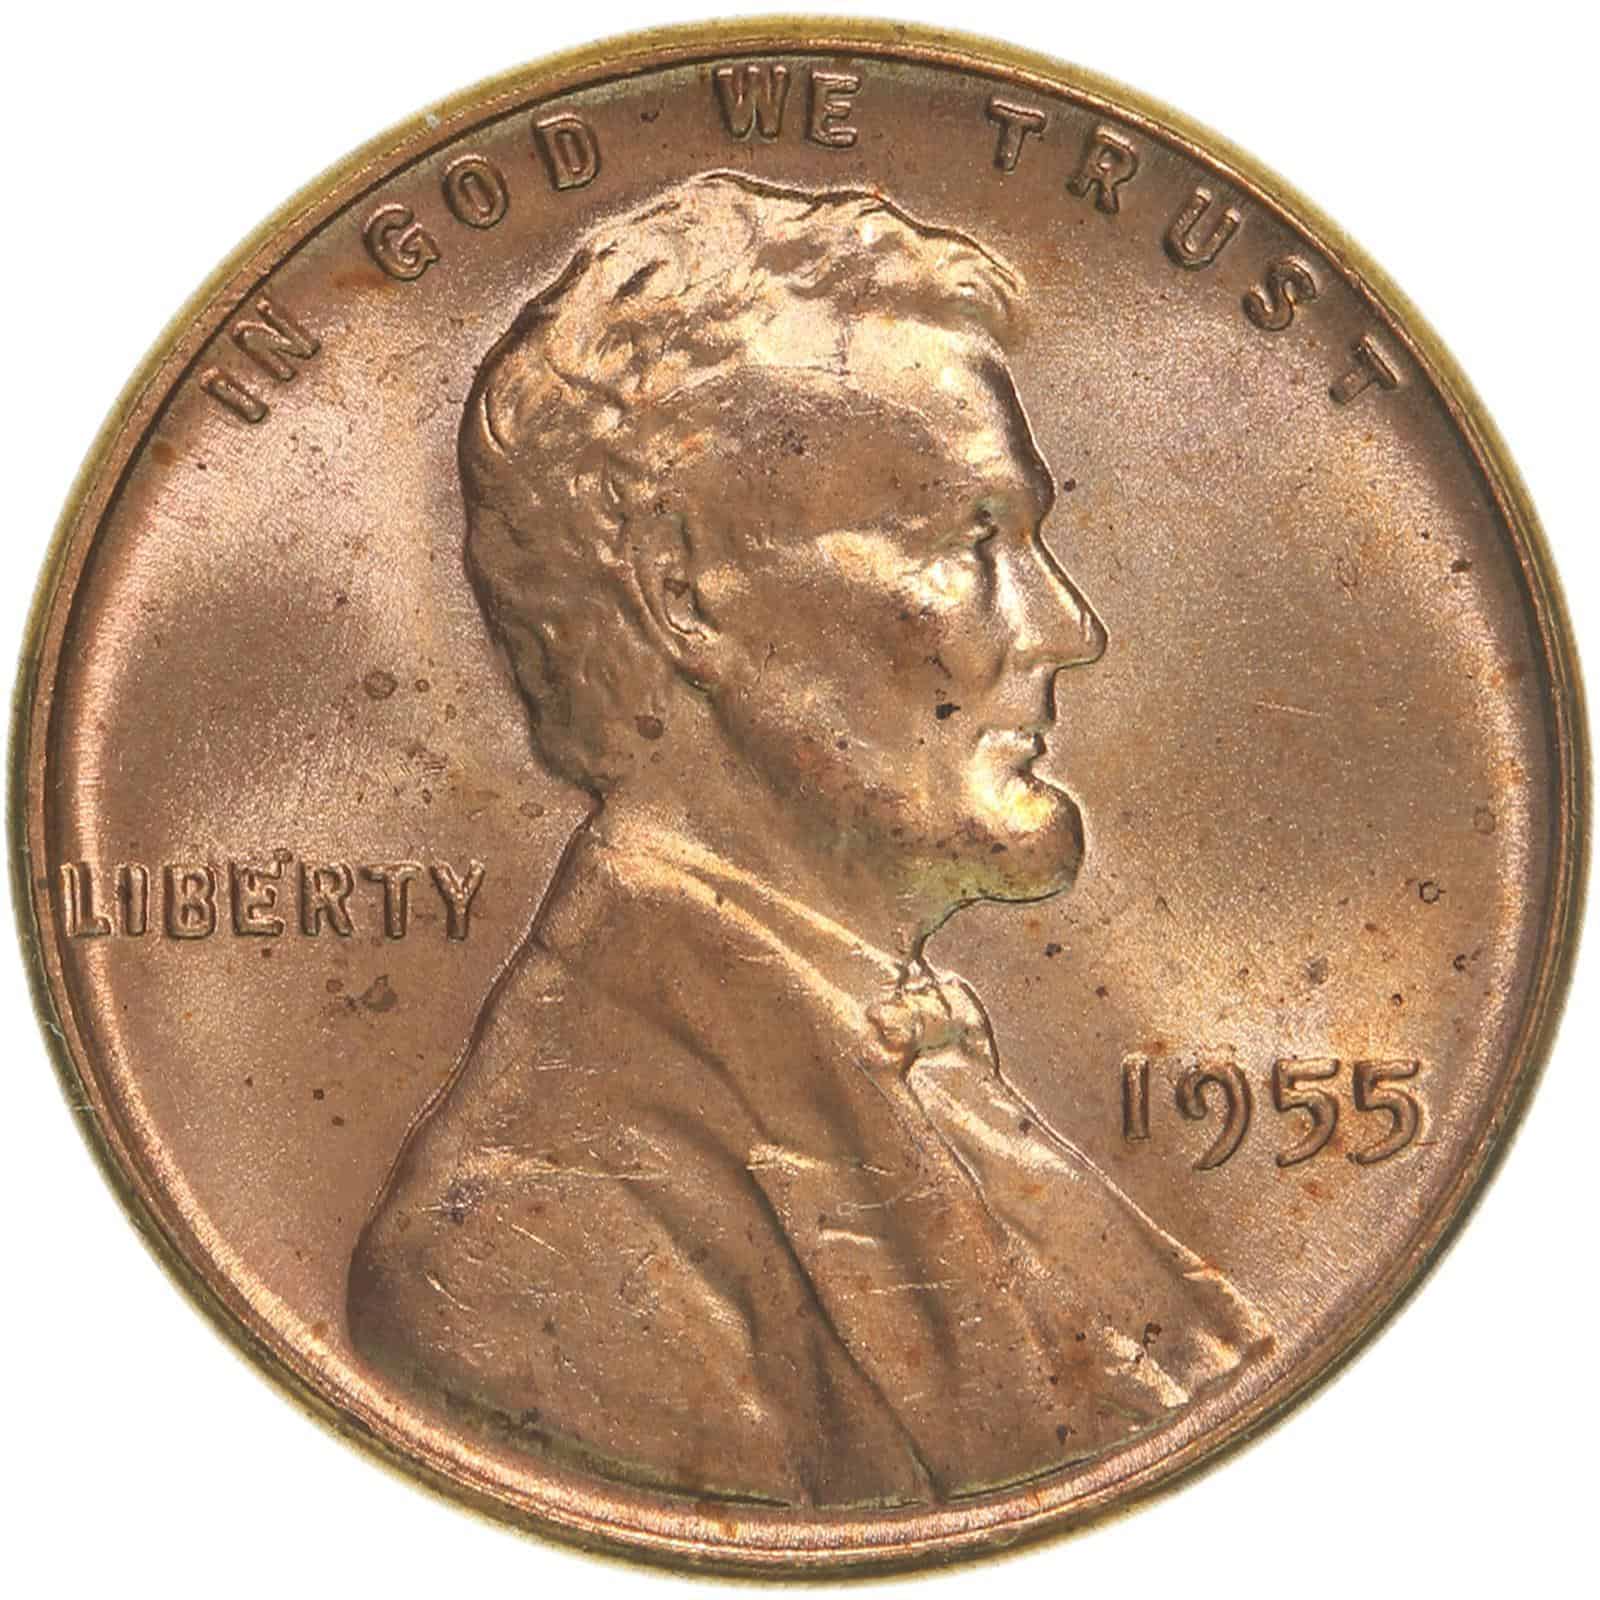 Obverse (head) features)